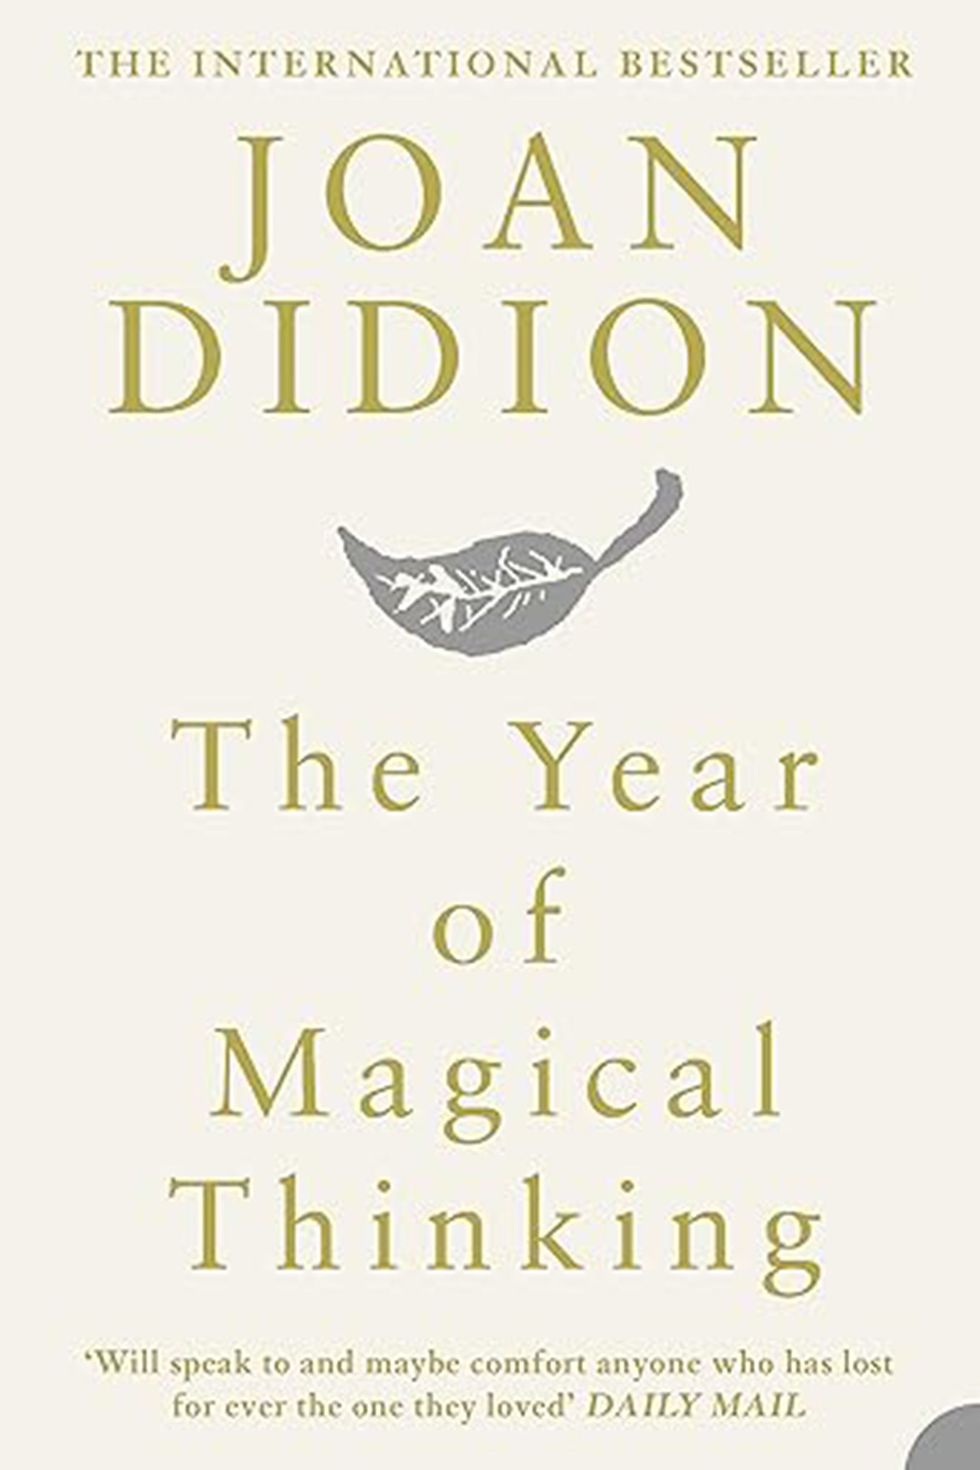 Joan Didion, 'The Year of Magical Thinking' 